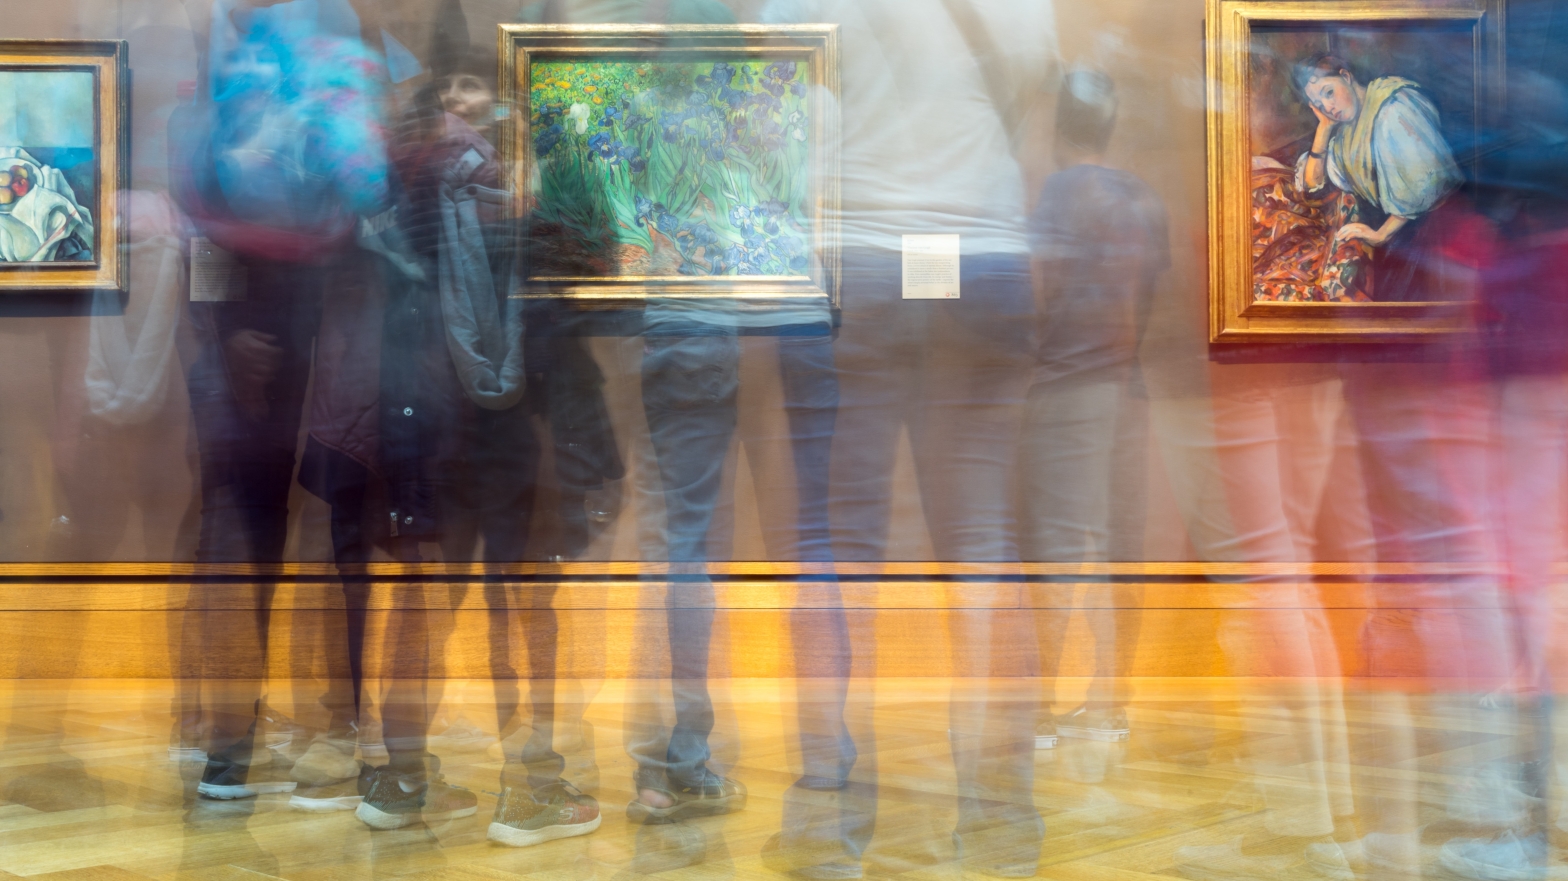 Image shows a group of people standing in front of paintings in an art gallery. The photo has been taken with slow shutter speed so that the people are blurred and the paintings are in focus.